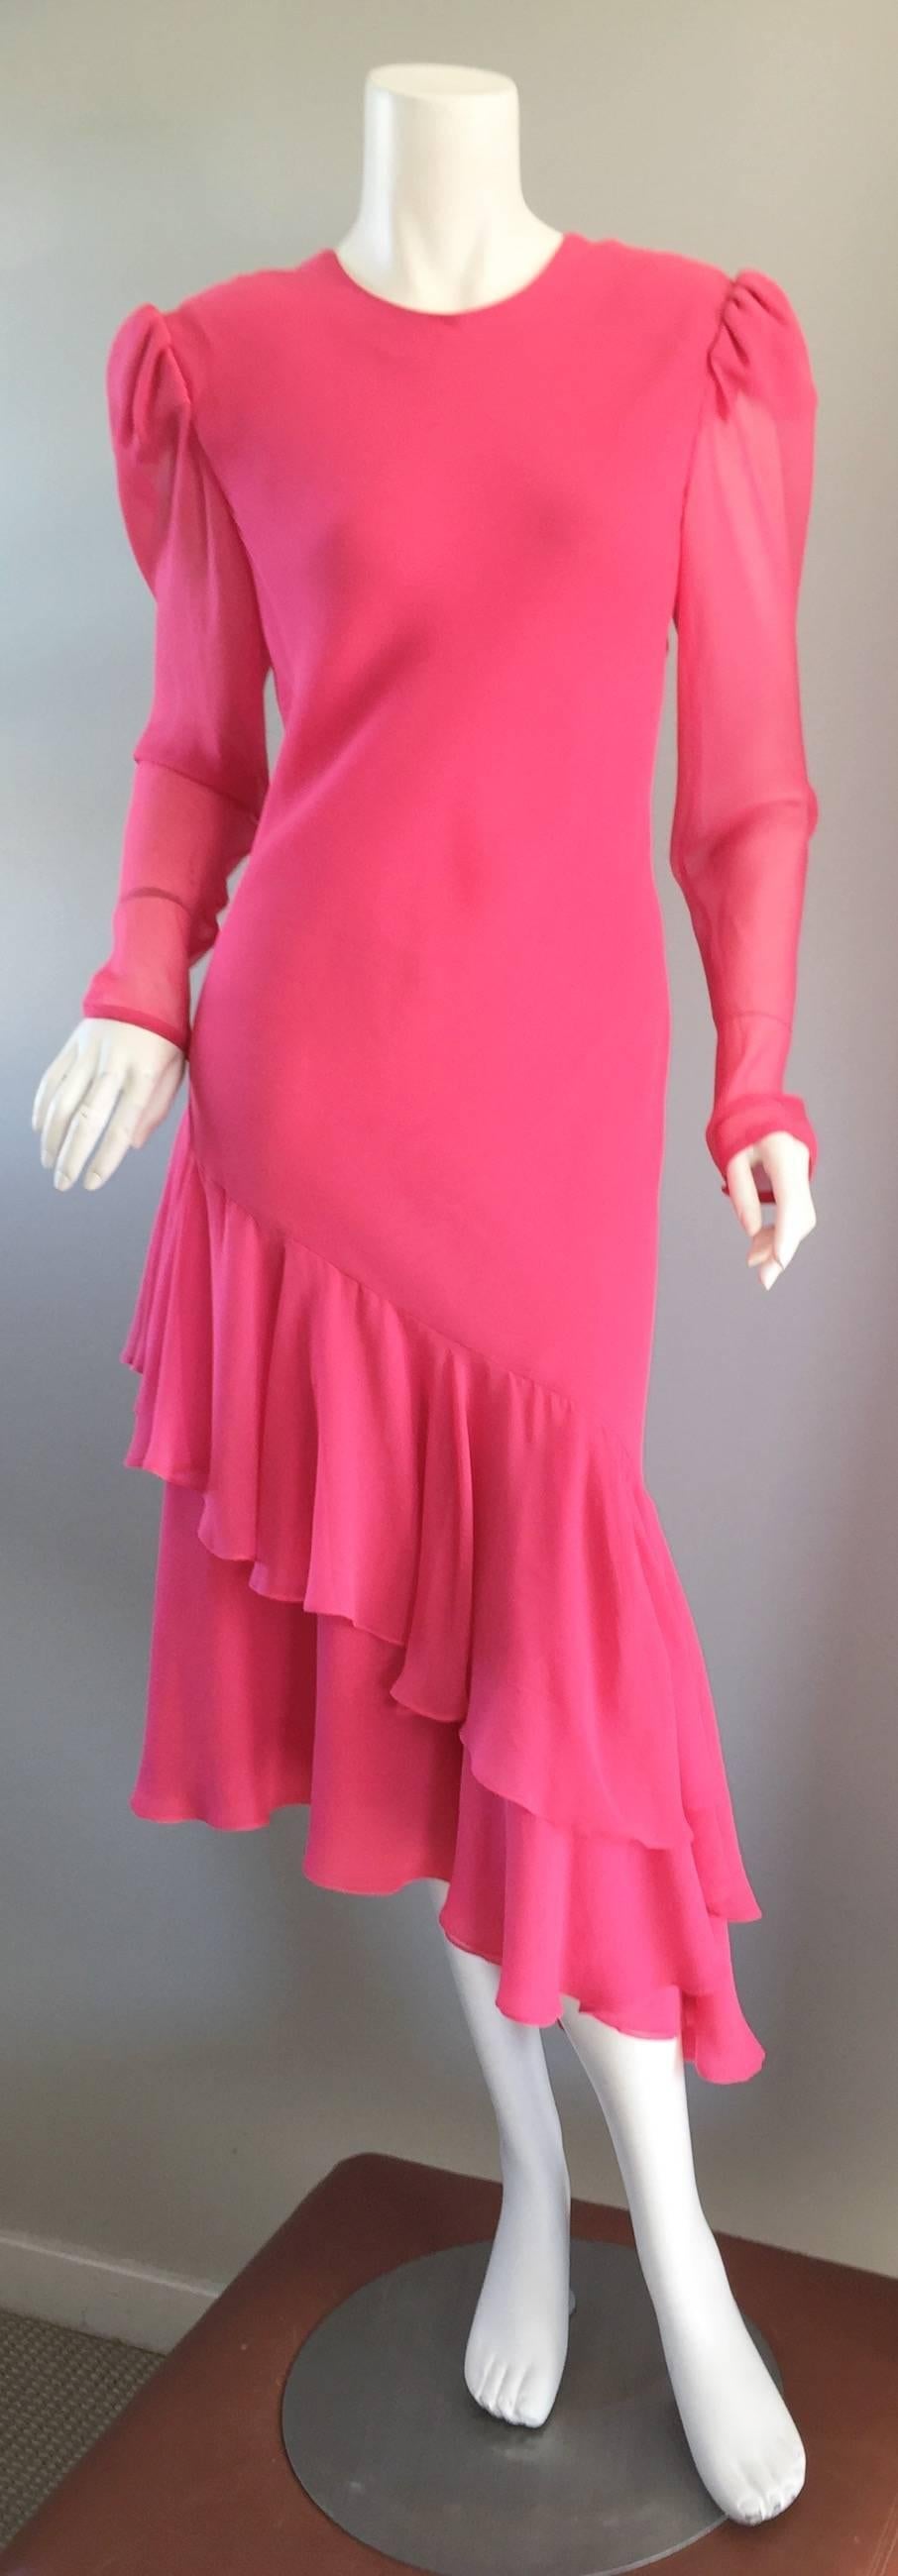 Beautiful vintage CAROLINA HERRERA pink silk chiffon dress! Layers and layers of couture quality silk chiffon! Wonderfully tailored, with slim long sleeves, an asymmetrical ruffled hem line, and a tie at the back. Prettiest pink color! Great alone,